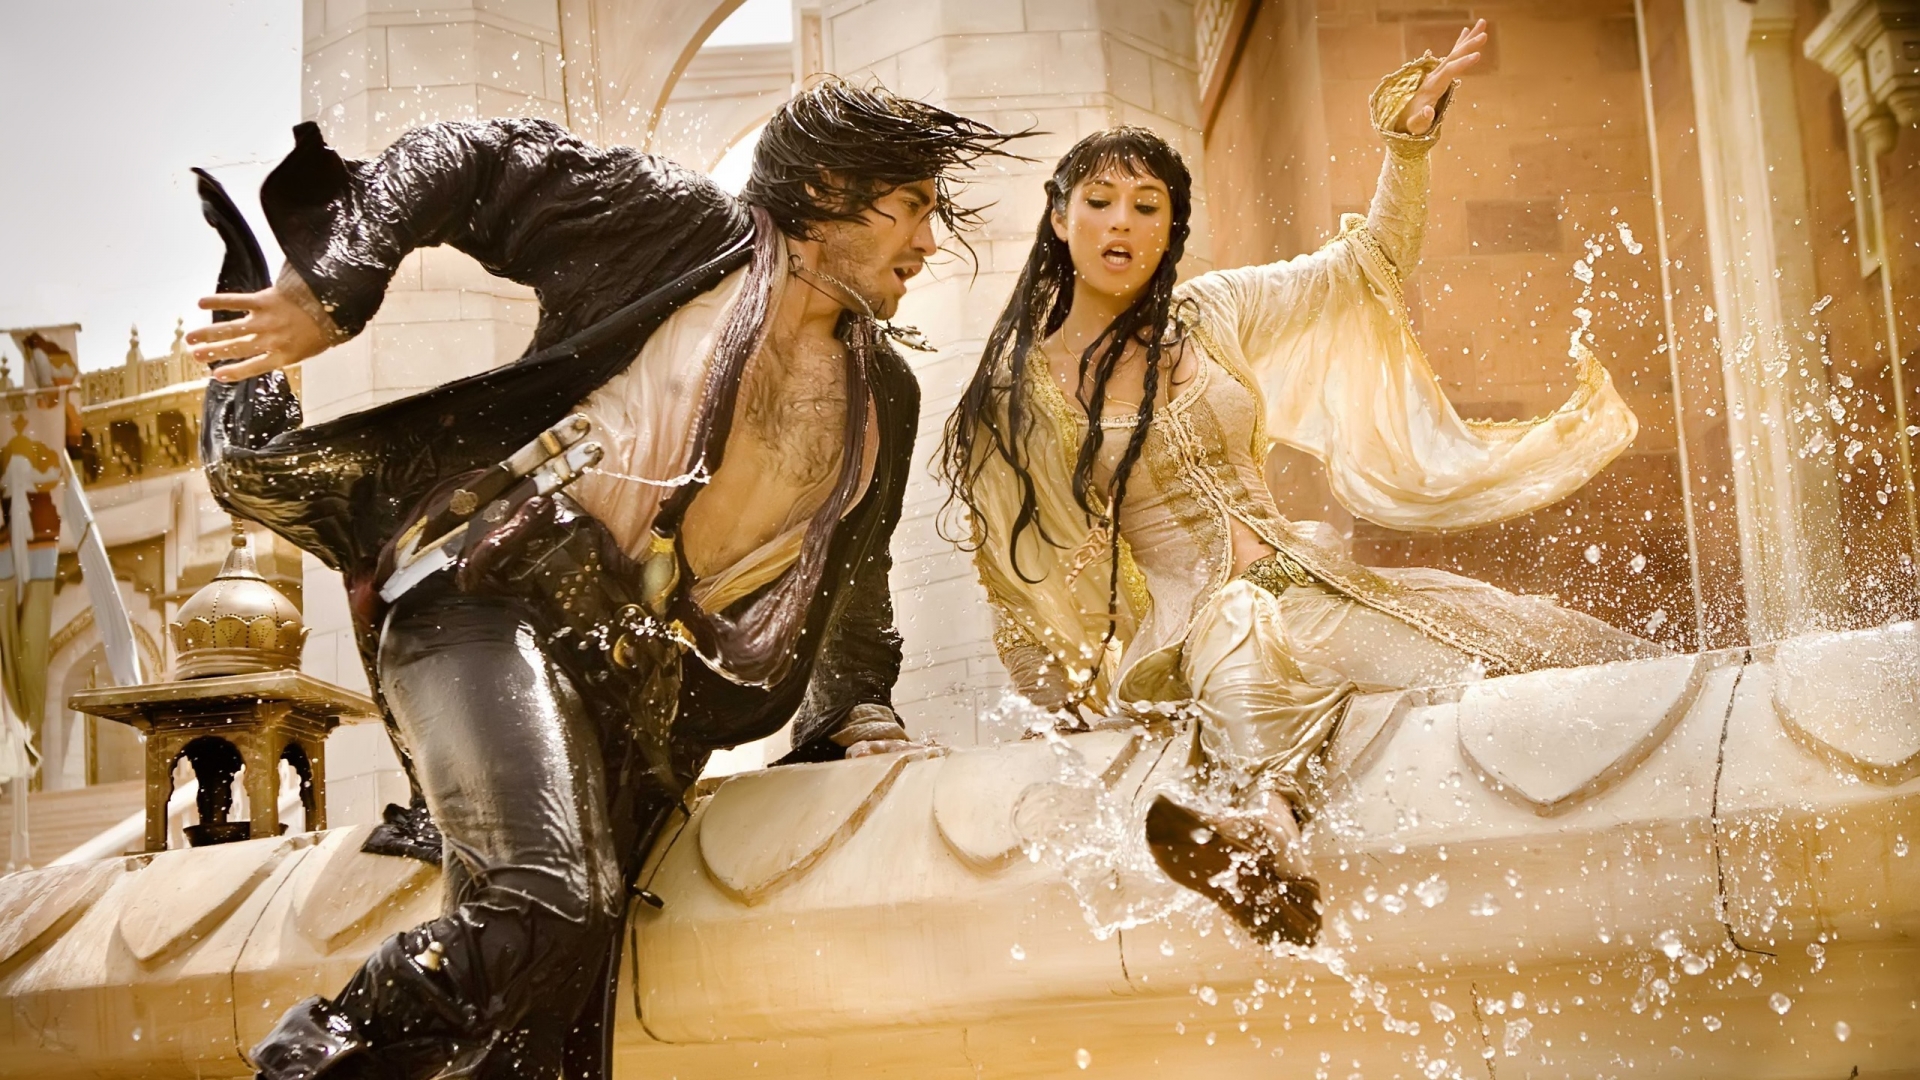 Prince Of Persia: The Sands of Time Movie for 1920 x 1080 HDTV 1080p resolution